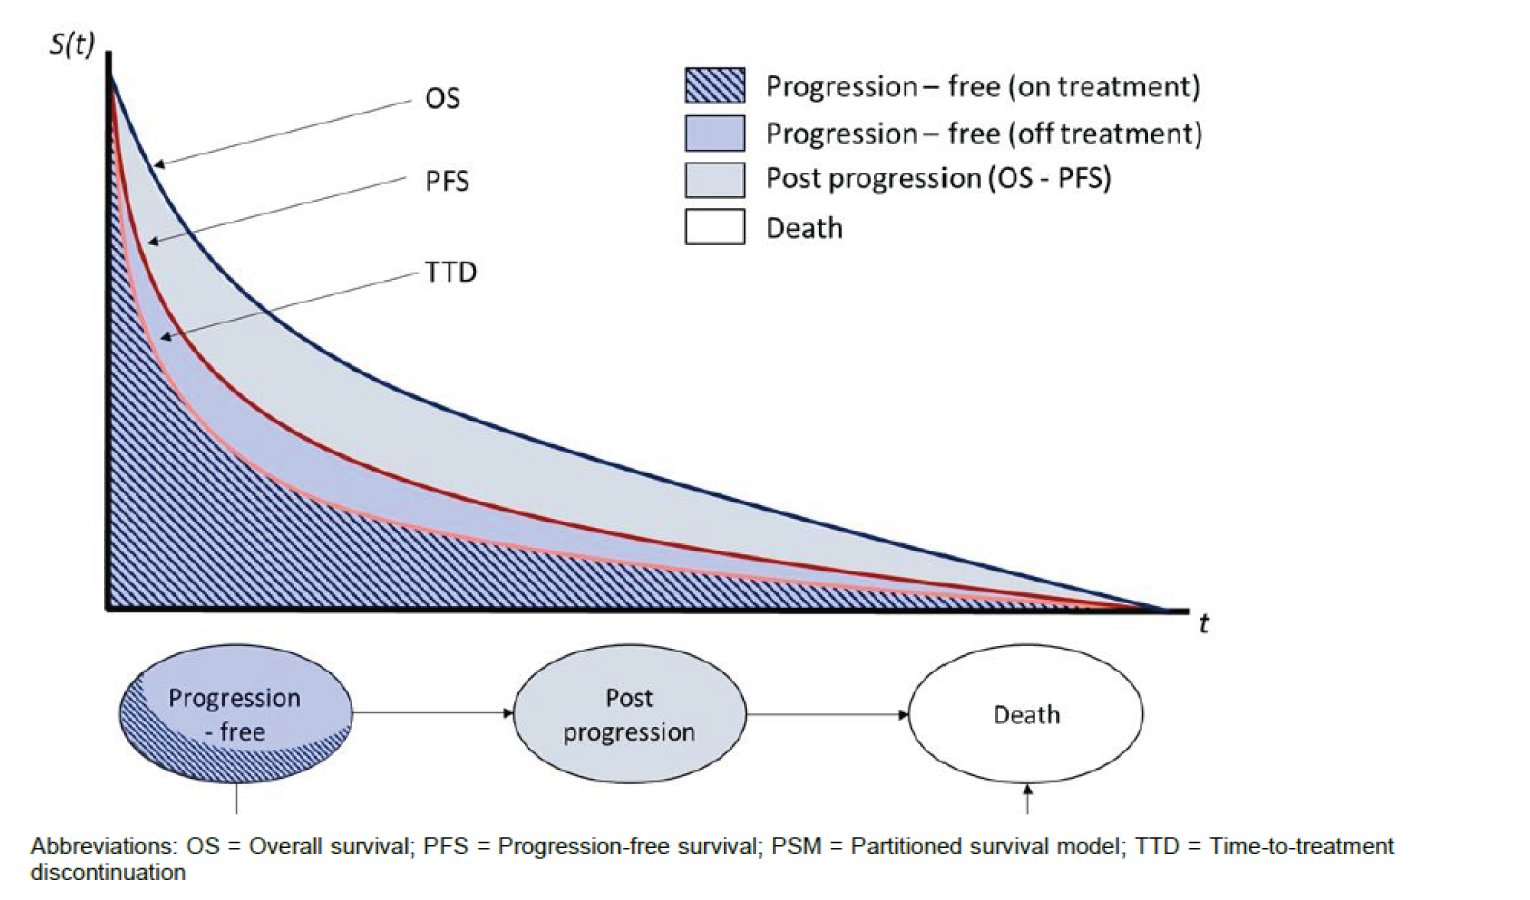 The figure depicts the incorporation of time to discontinuation, alongside progression-free survival and overall survival. The sponsor noted time to discontinuation occurred before progression, and therefore patients who discontinued treatment could remain in the progression-free survival health state. The post-progression state was determined by the difference between the overall survival and progression-free survival curves.